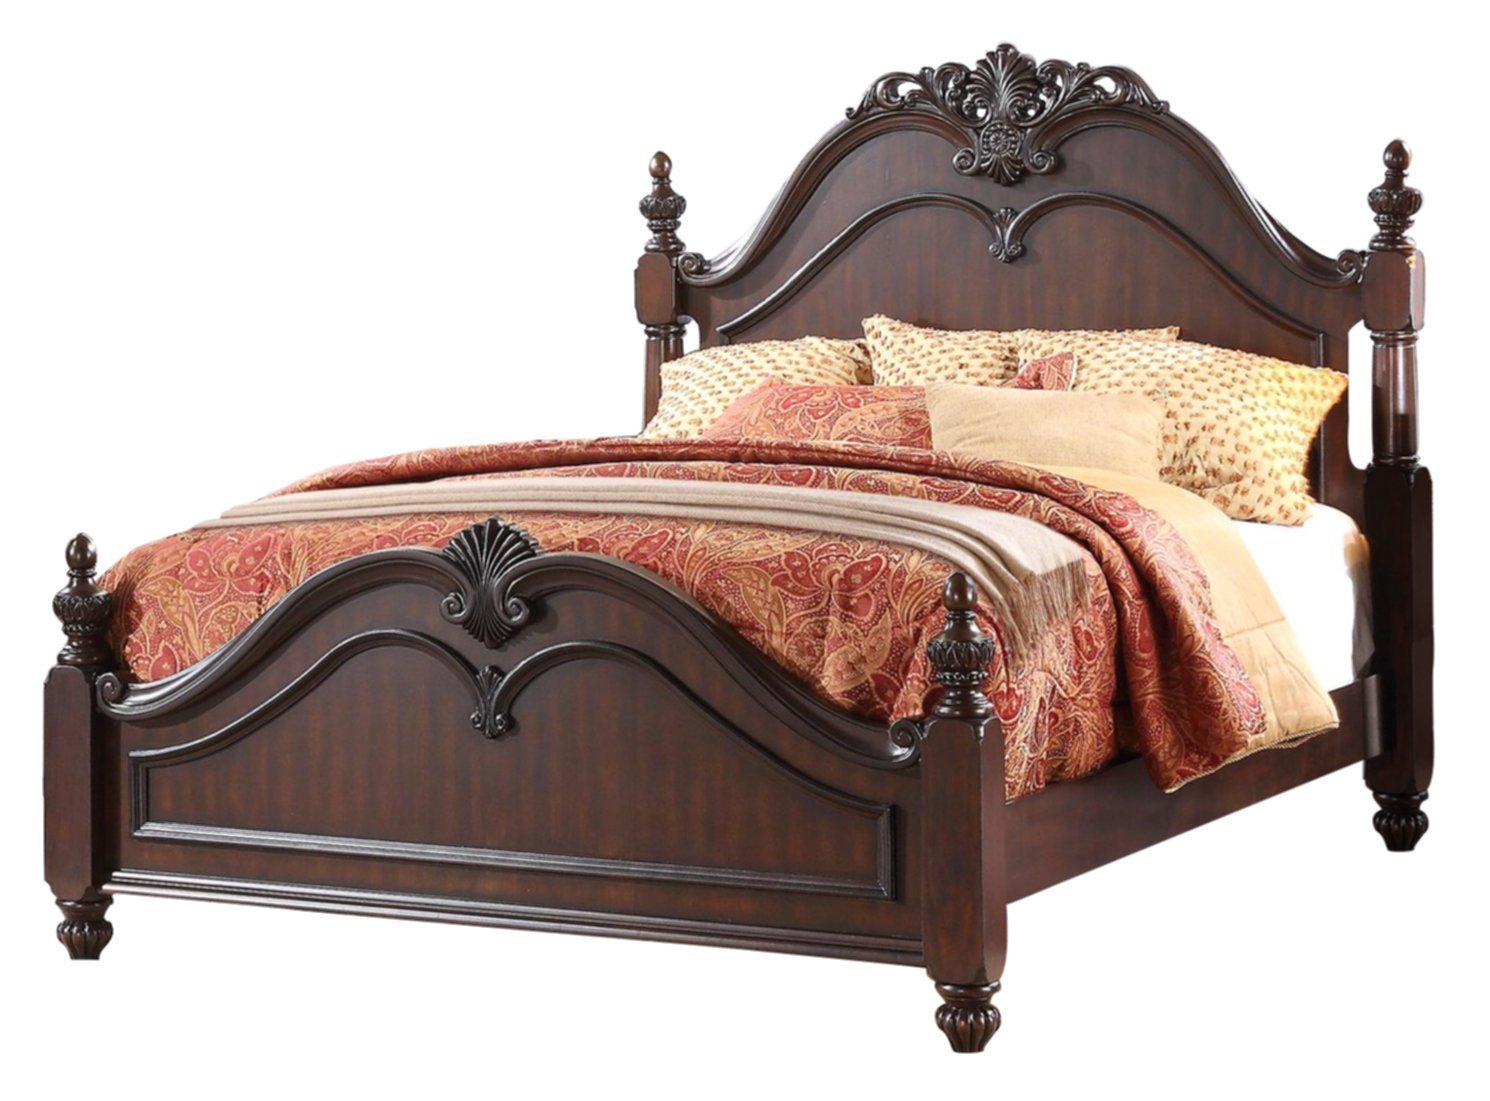 HEFX Momeyer French Country E King Poster Bed in Cherry